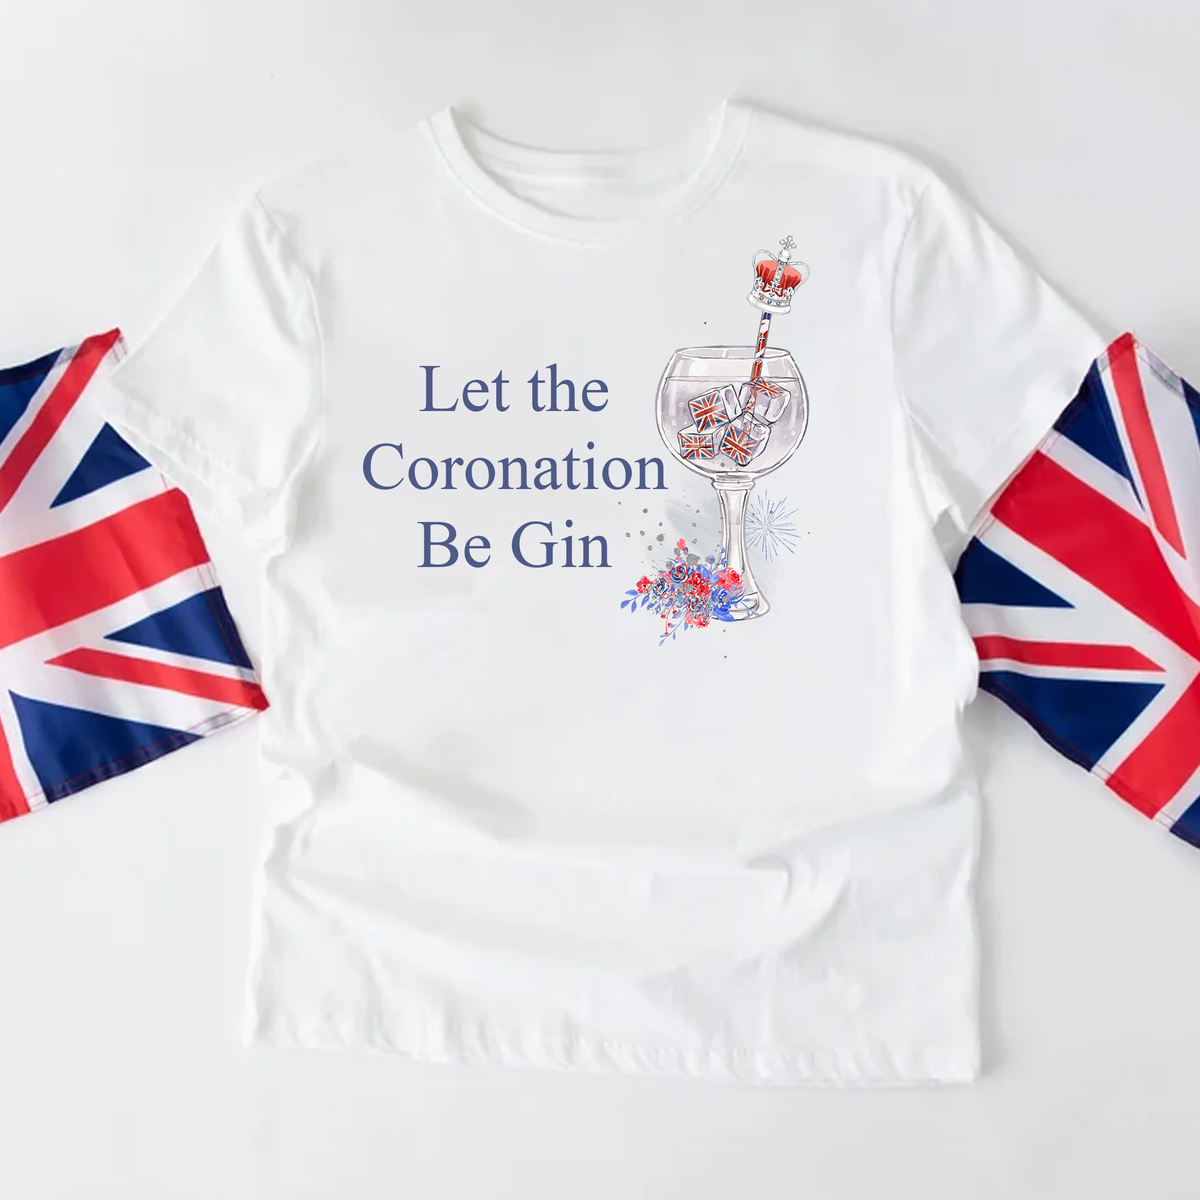 Let the Coronation Be-Gin Adults White T-Shirt - King Charles Coronation Celebrations